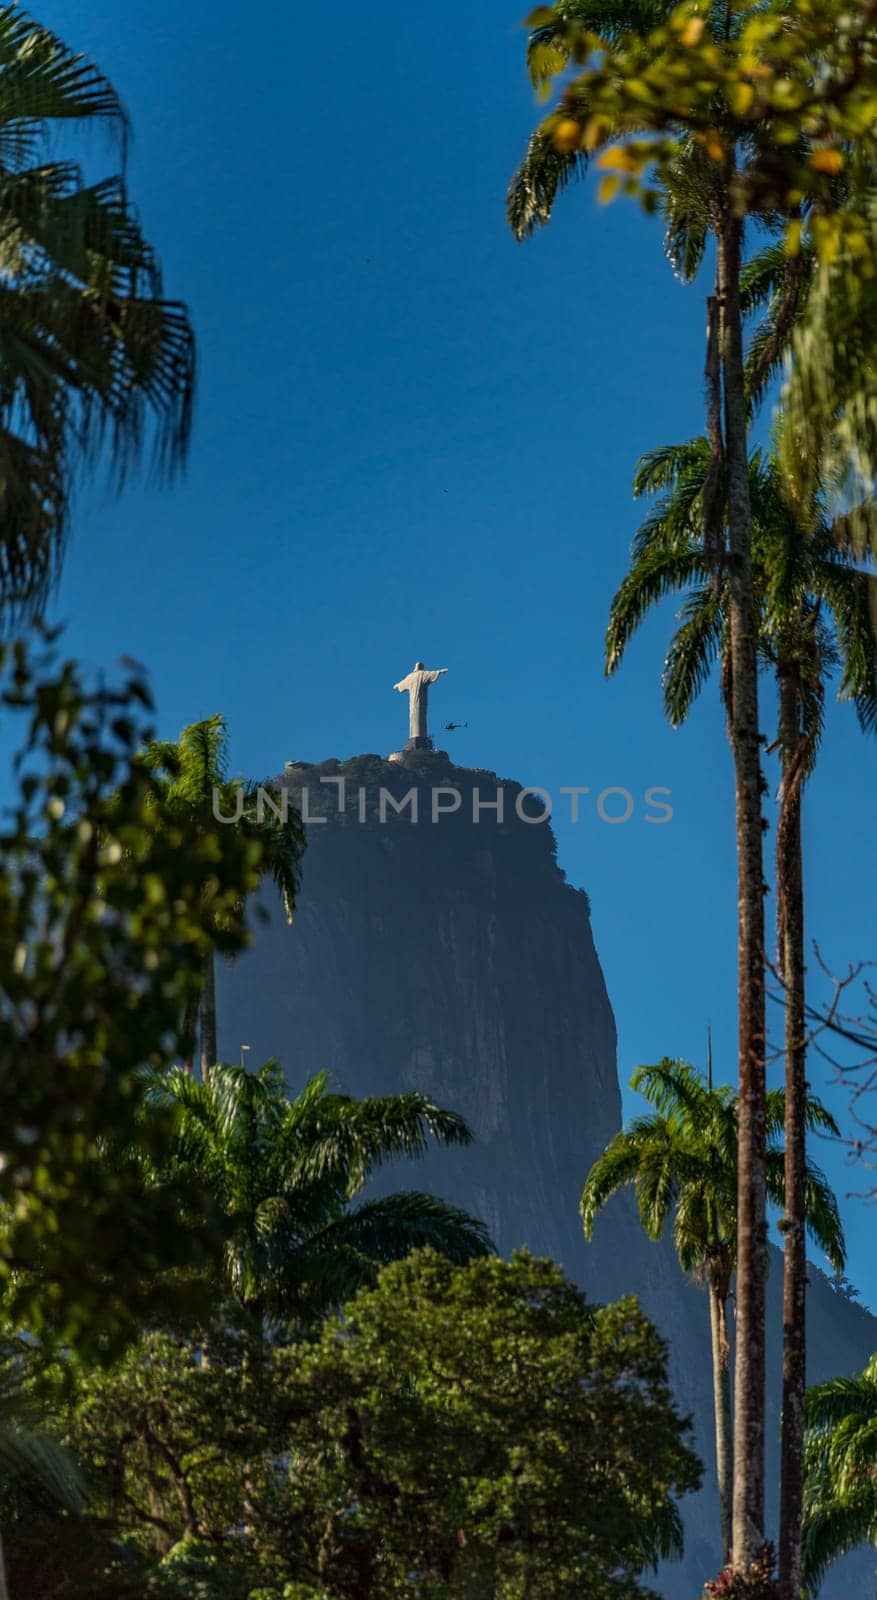 Statue silhouette on mountain with tropical flora under blue sky.